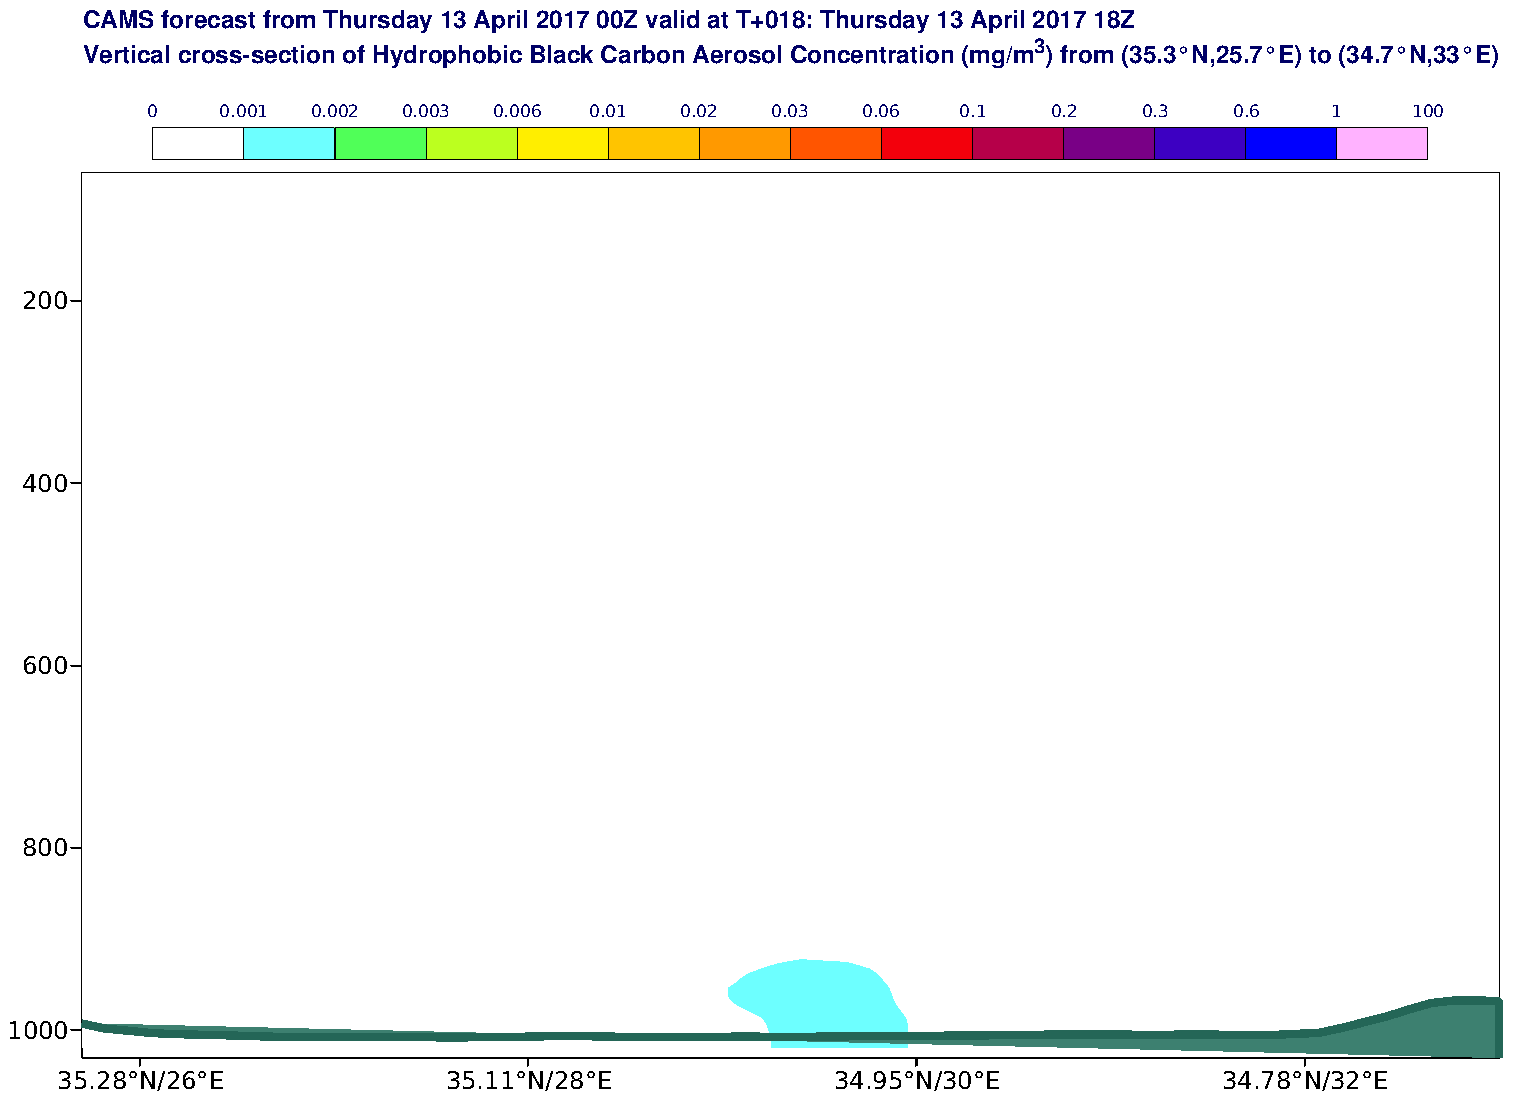 Vertical cross-section of Hydrophobic Black Carbon Aerosol Concentration (mg/m3) valid at T18 - 2017-04-13 18:00